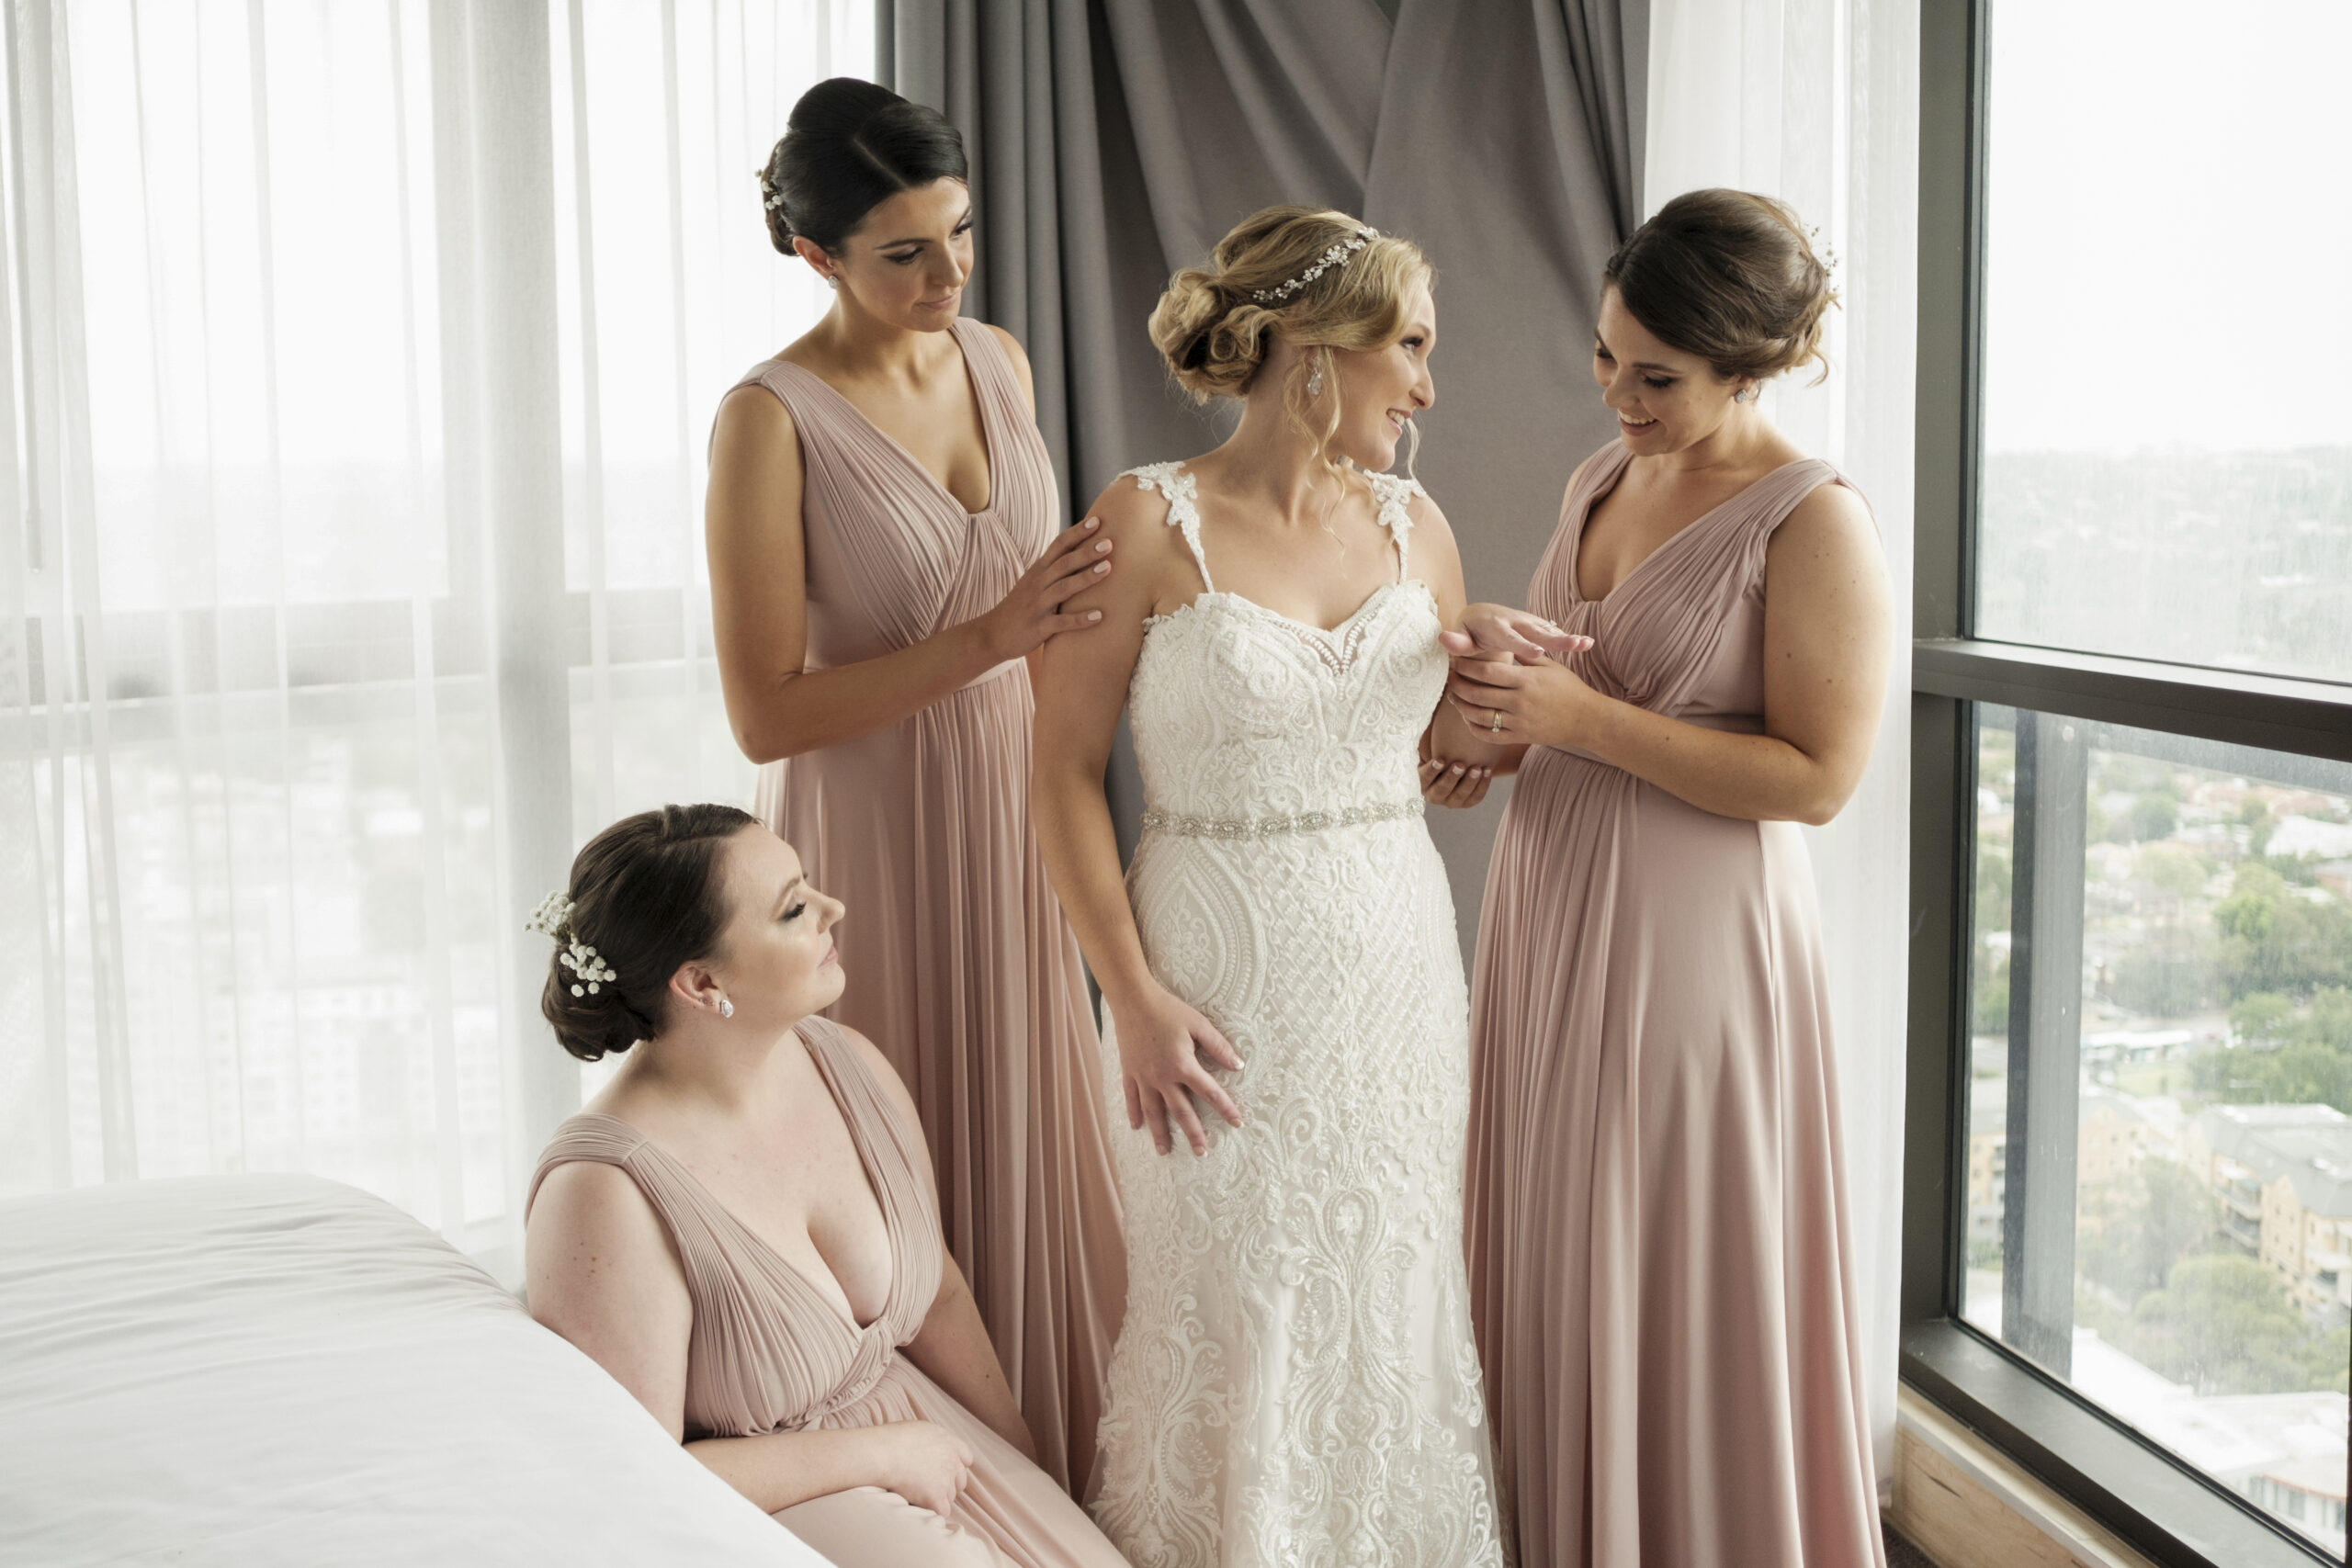 Bride being fitted in to dress with bridesmaids.